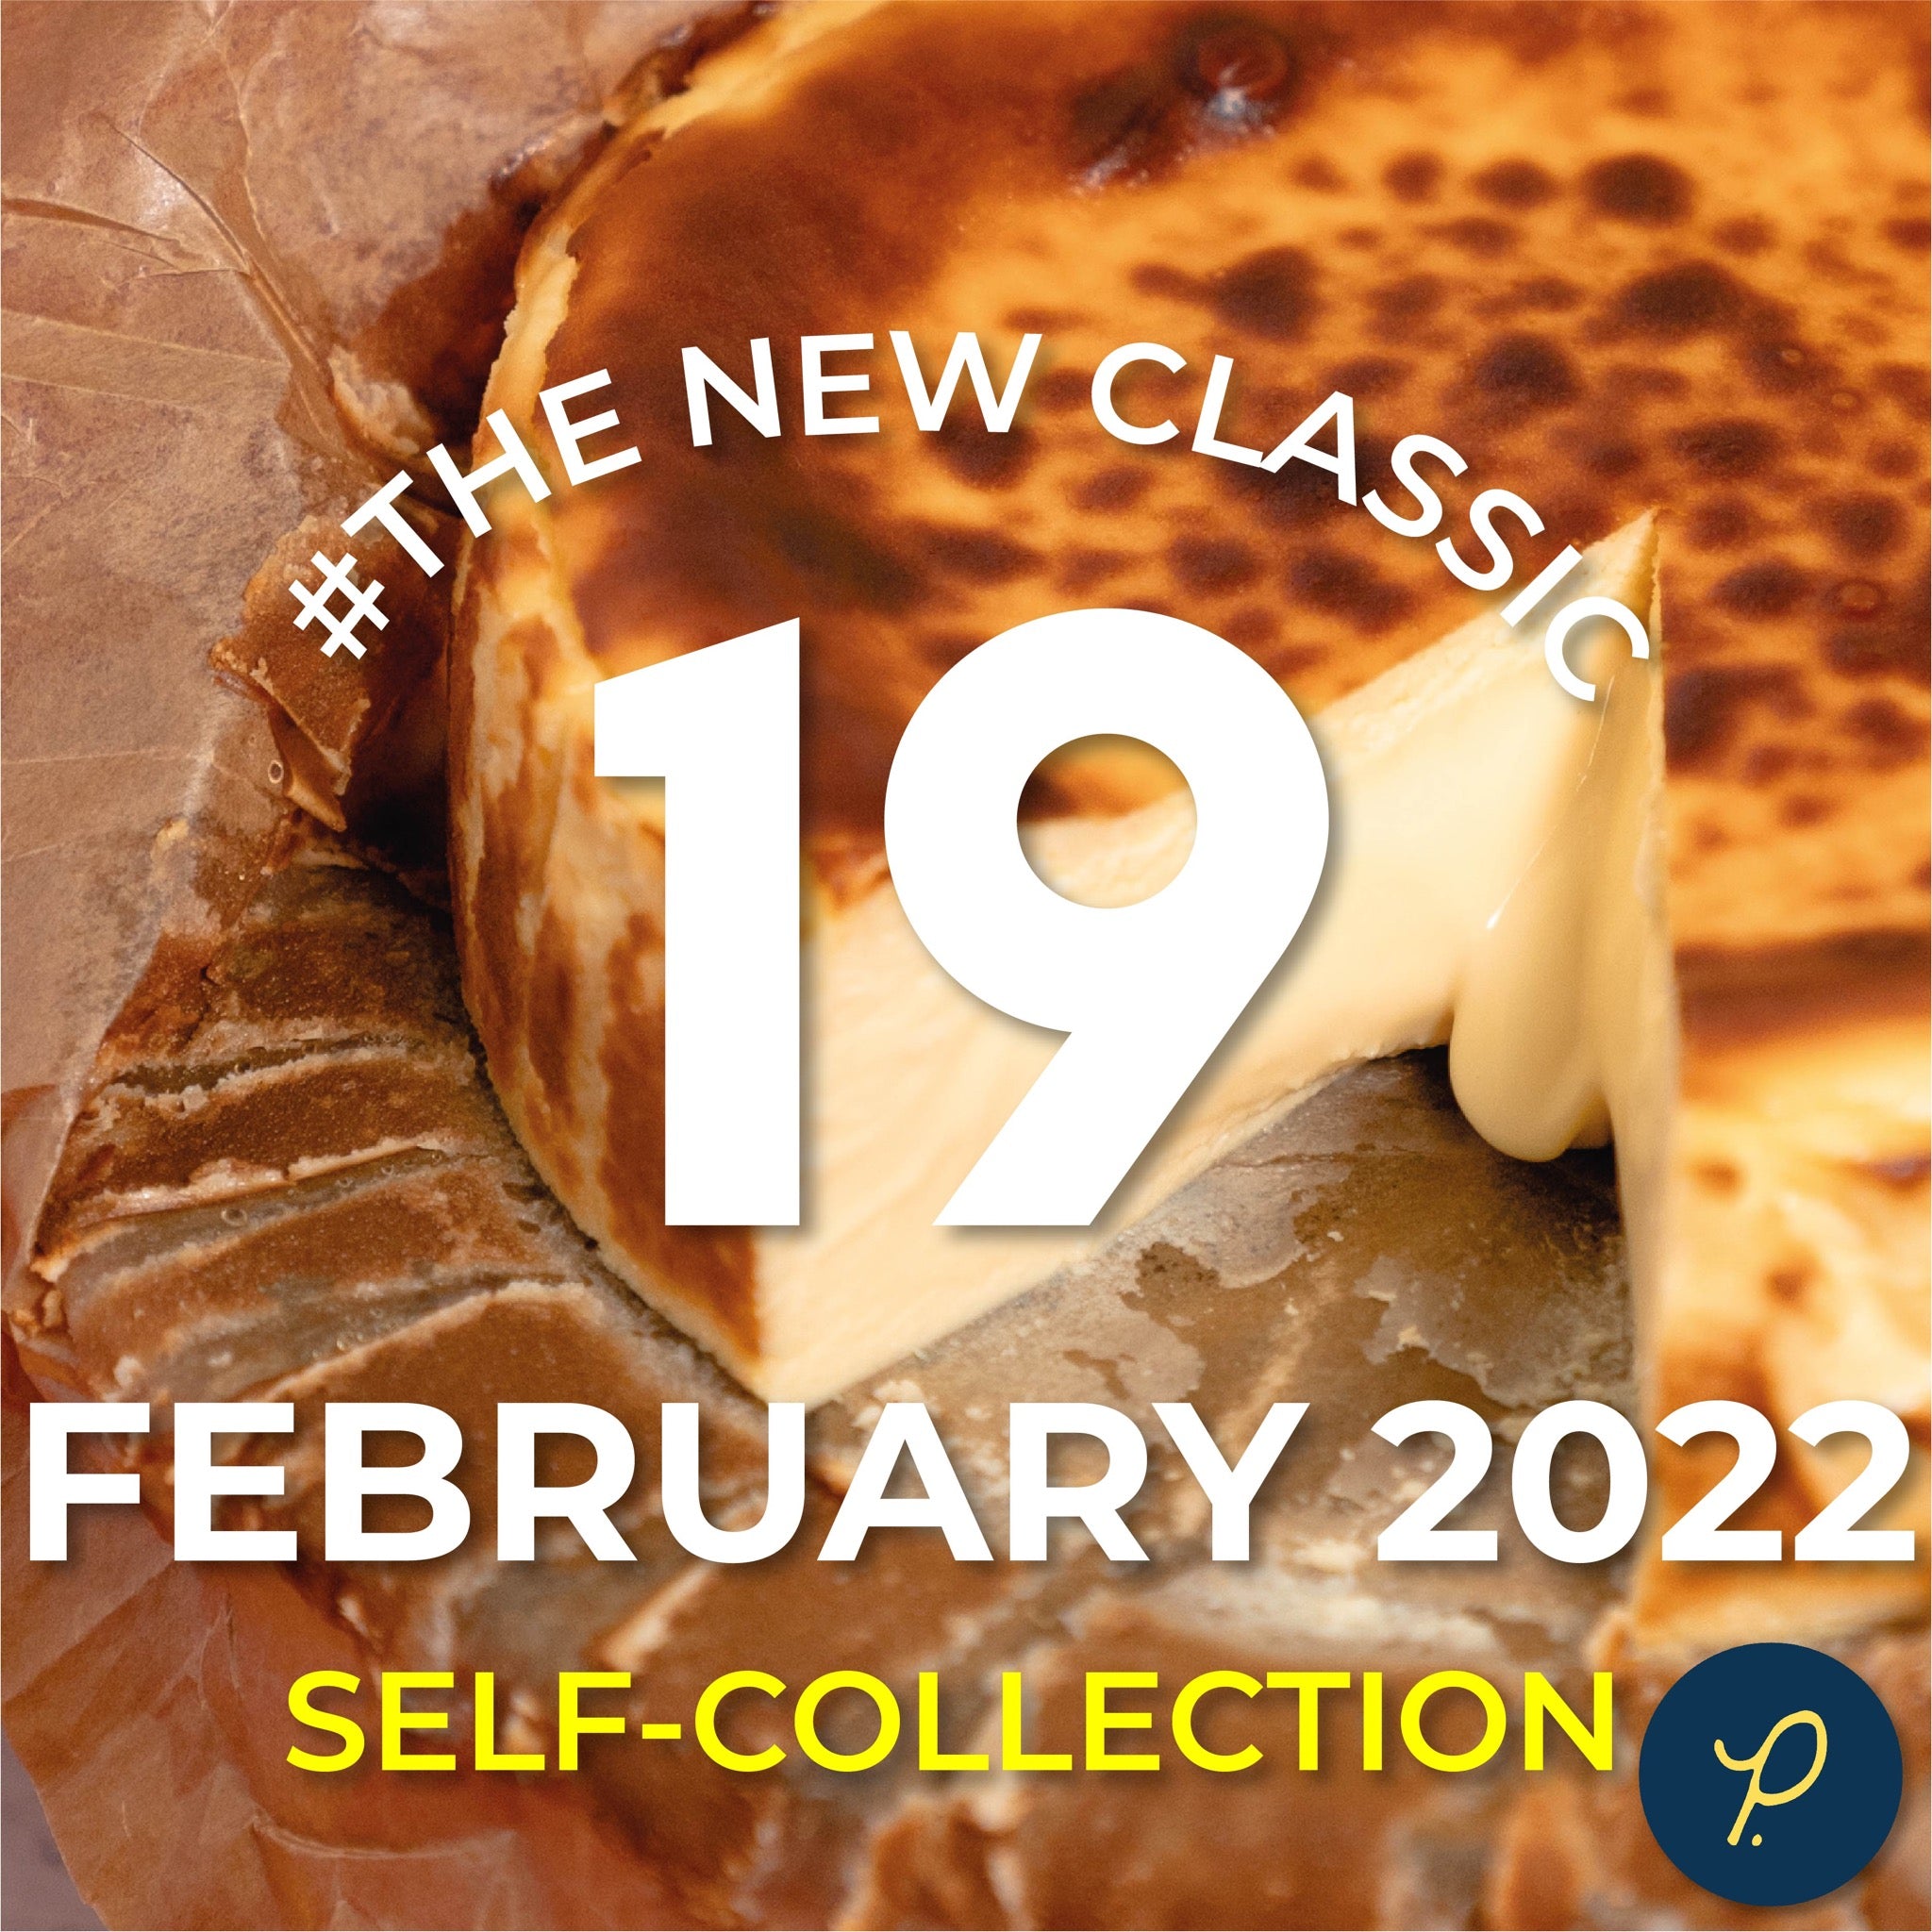 Burnt Cheesecake - 19 February 2022 Slot (Self-Collection)